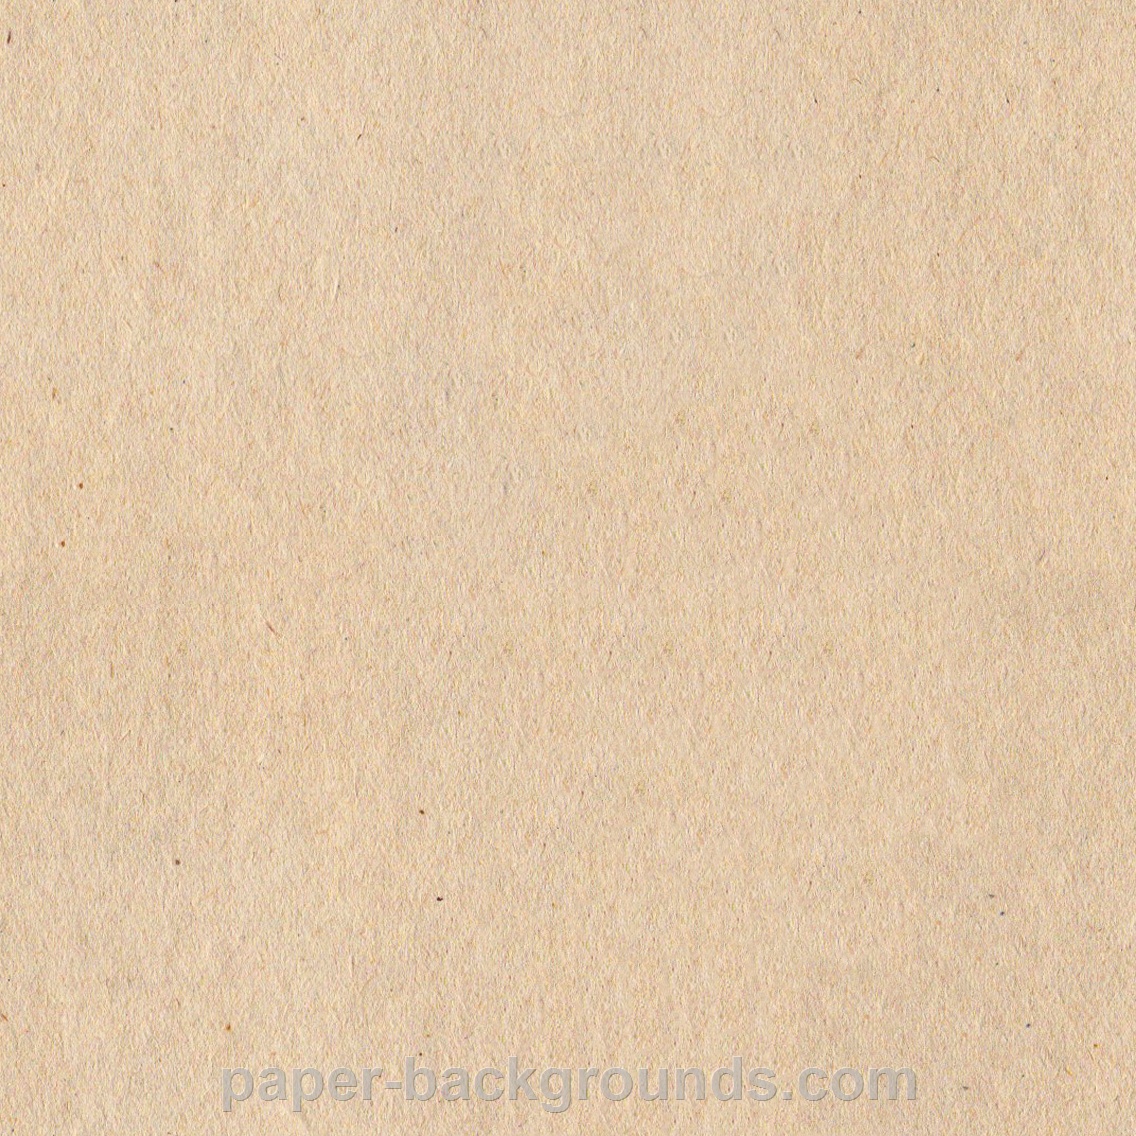 Seamless Vintage Paper Quality